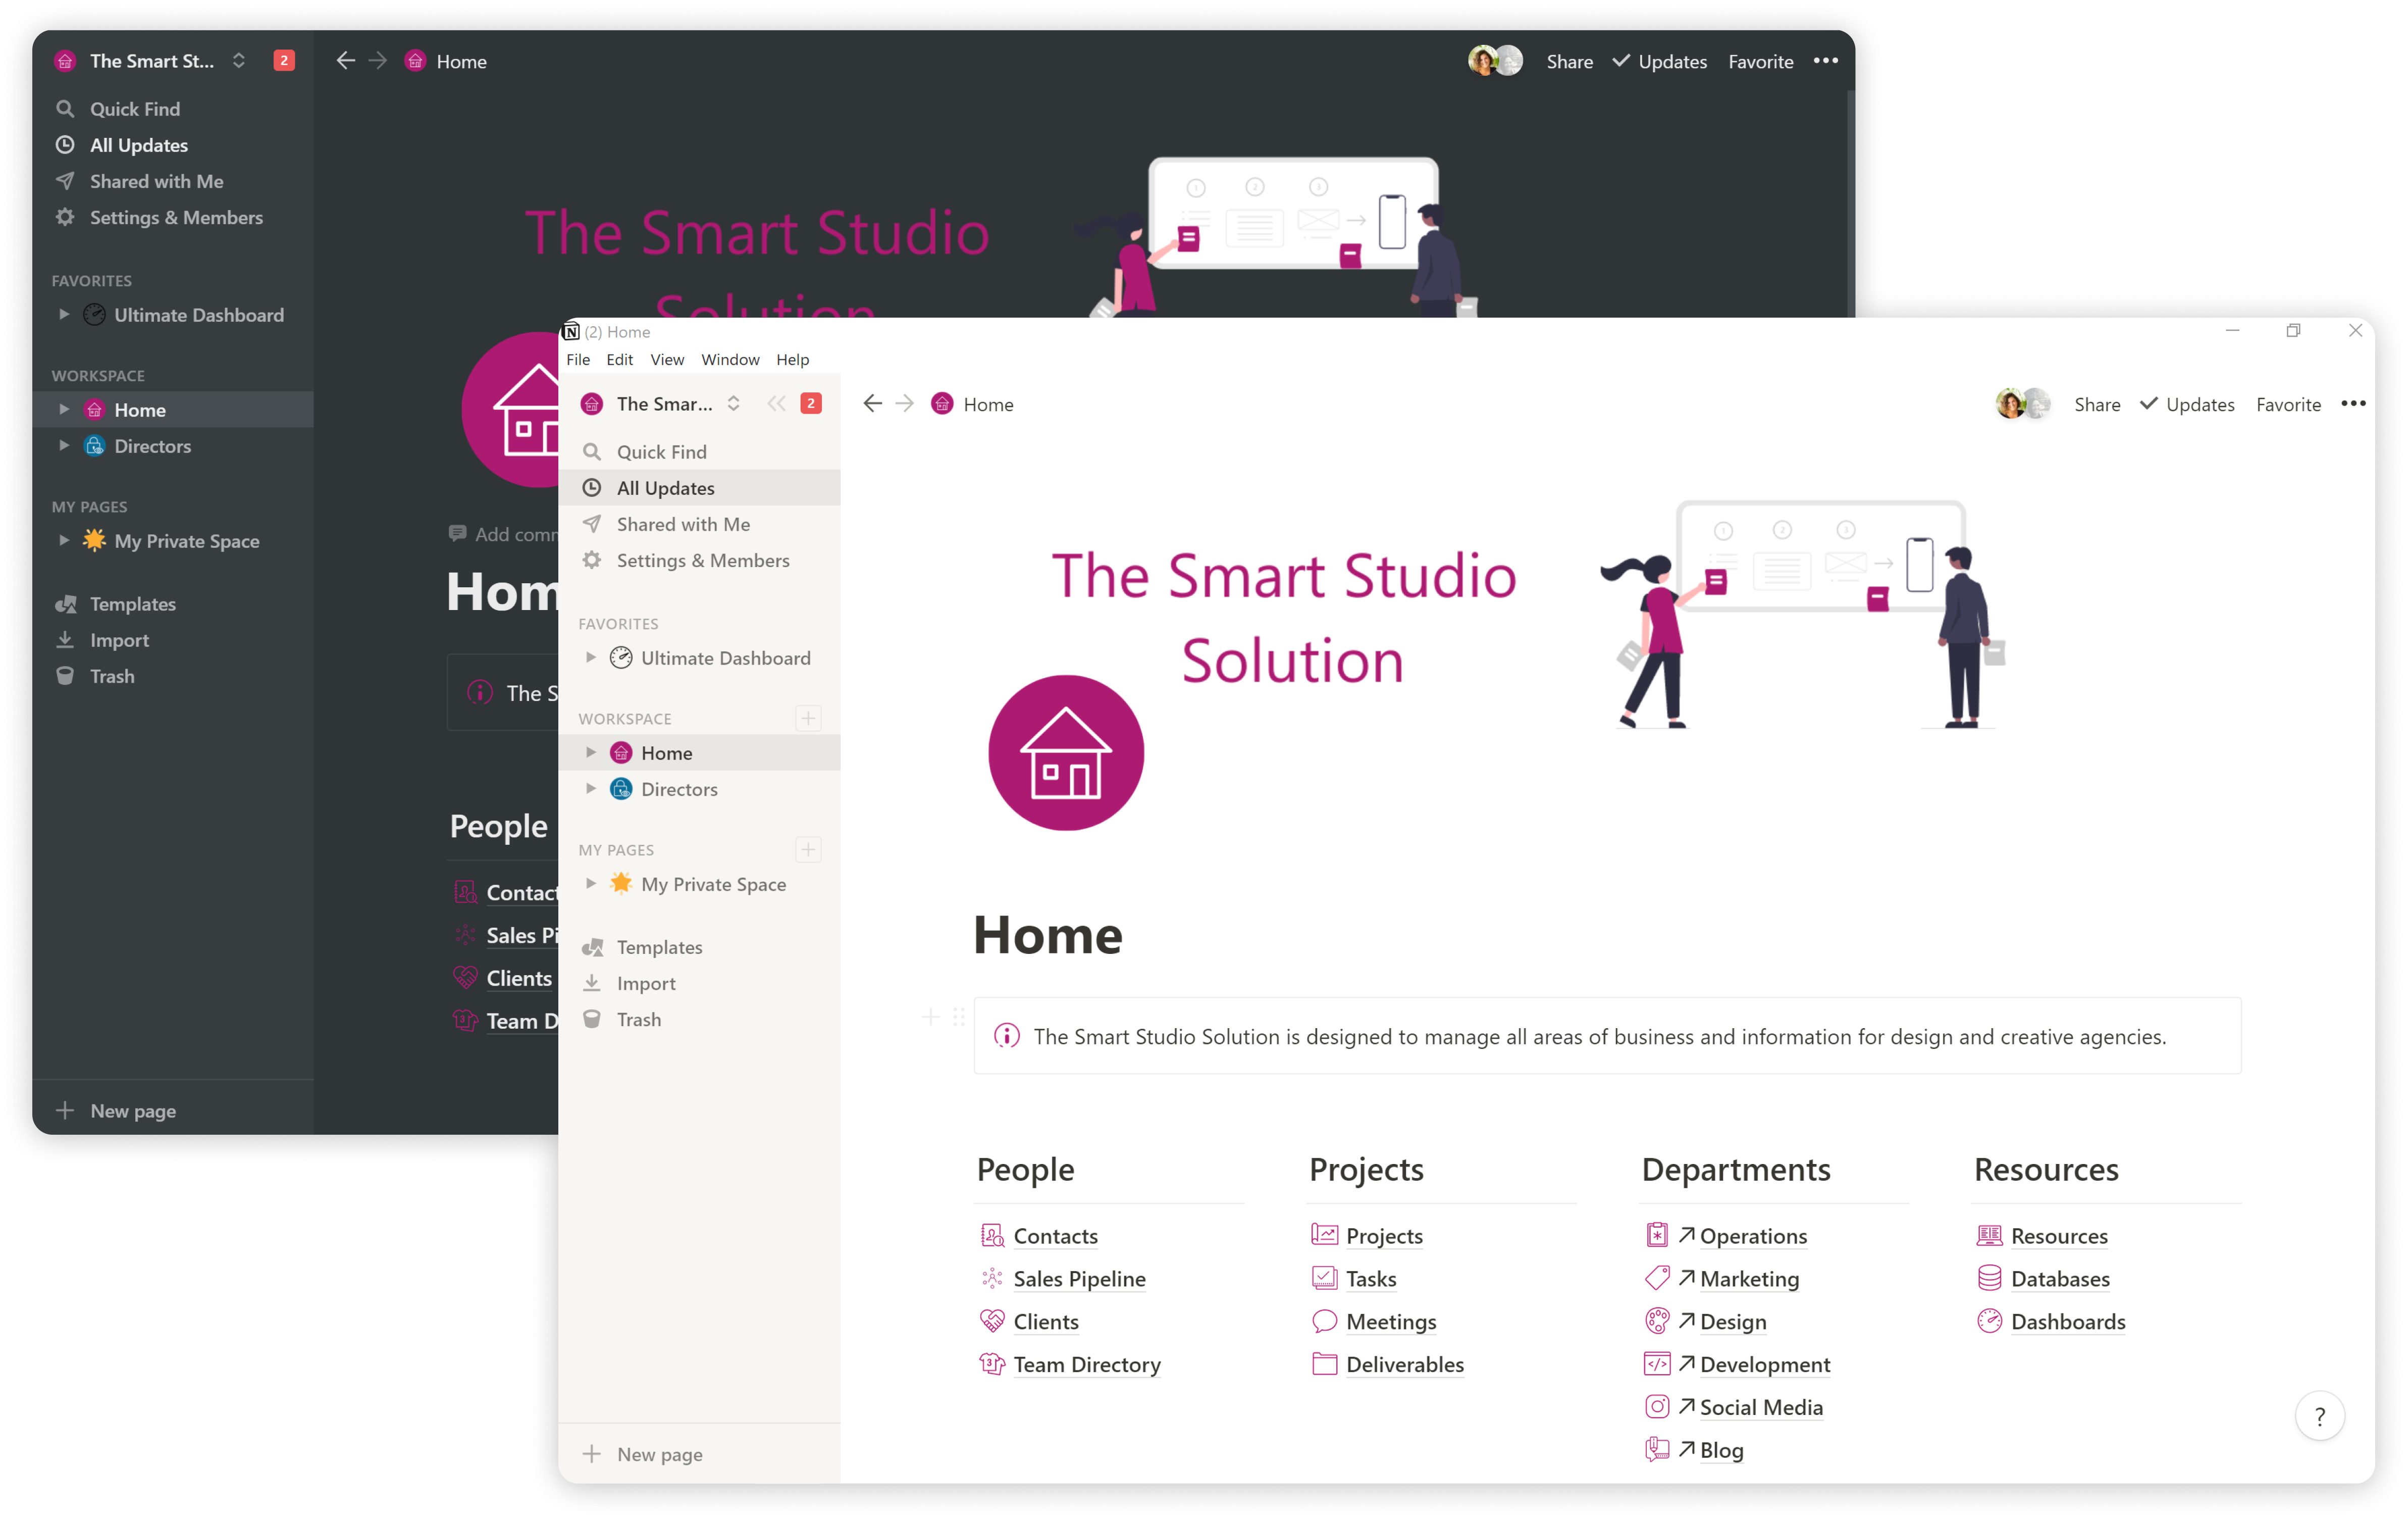 The Smart Studio Solution by Notionology